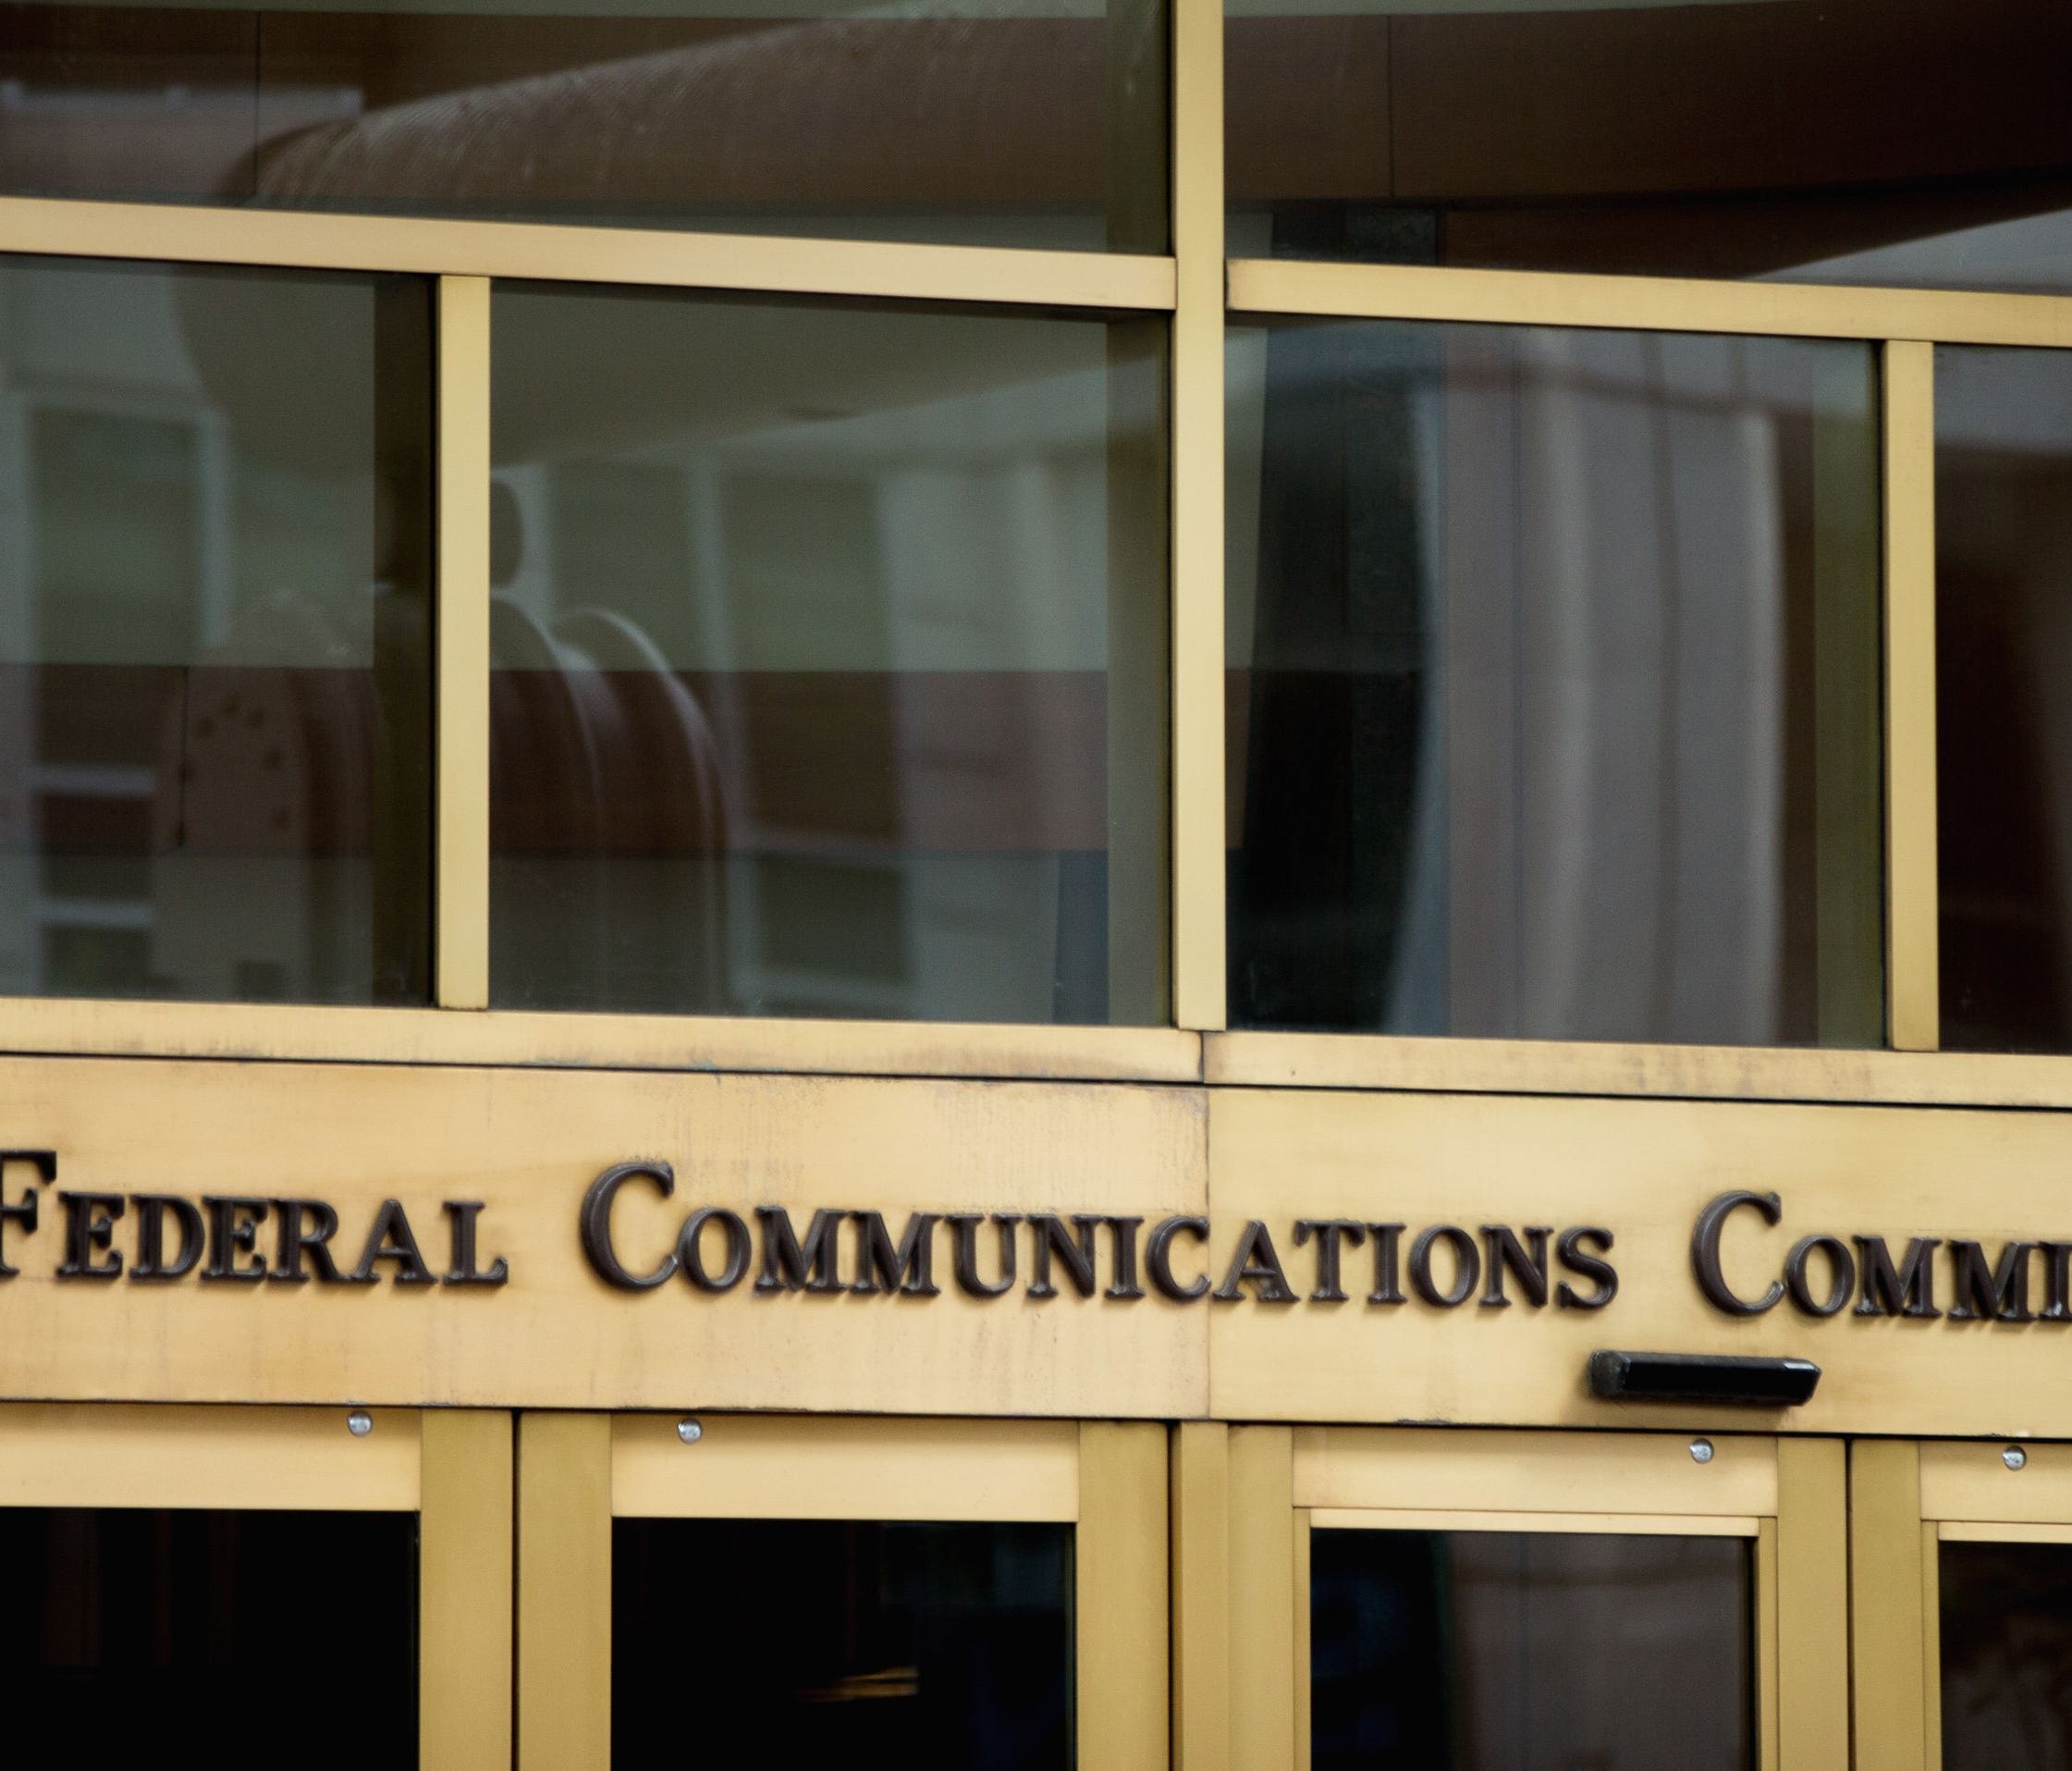 The entrance to the Federal Communications Commission (FCC) building in Washington on June 19, 2015.